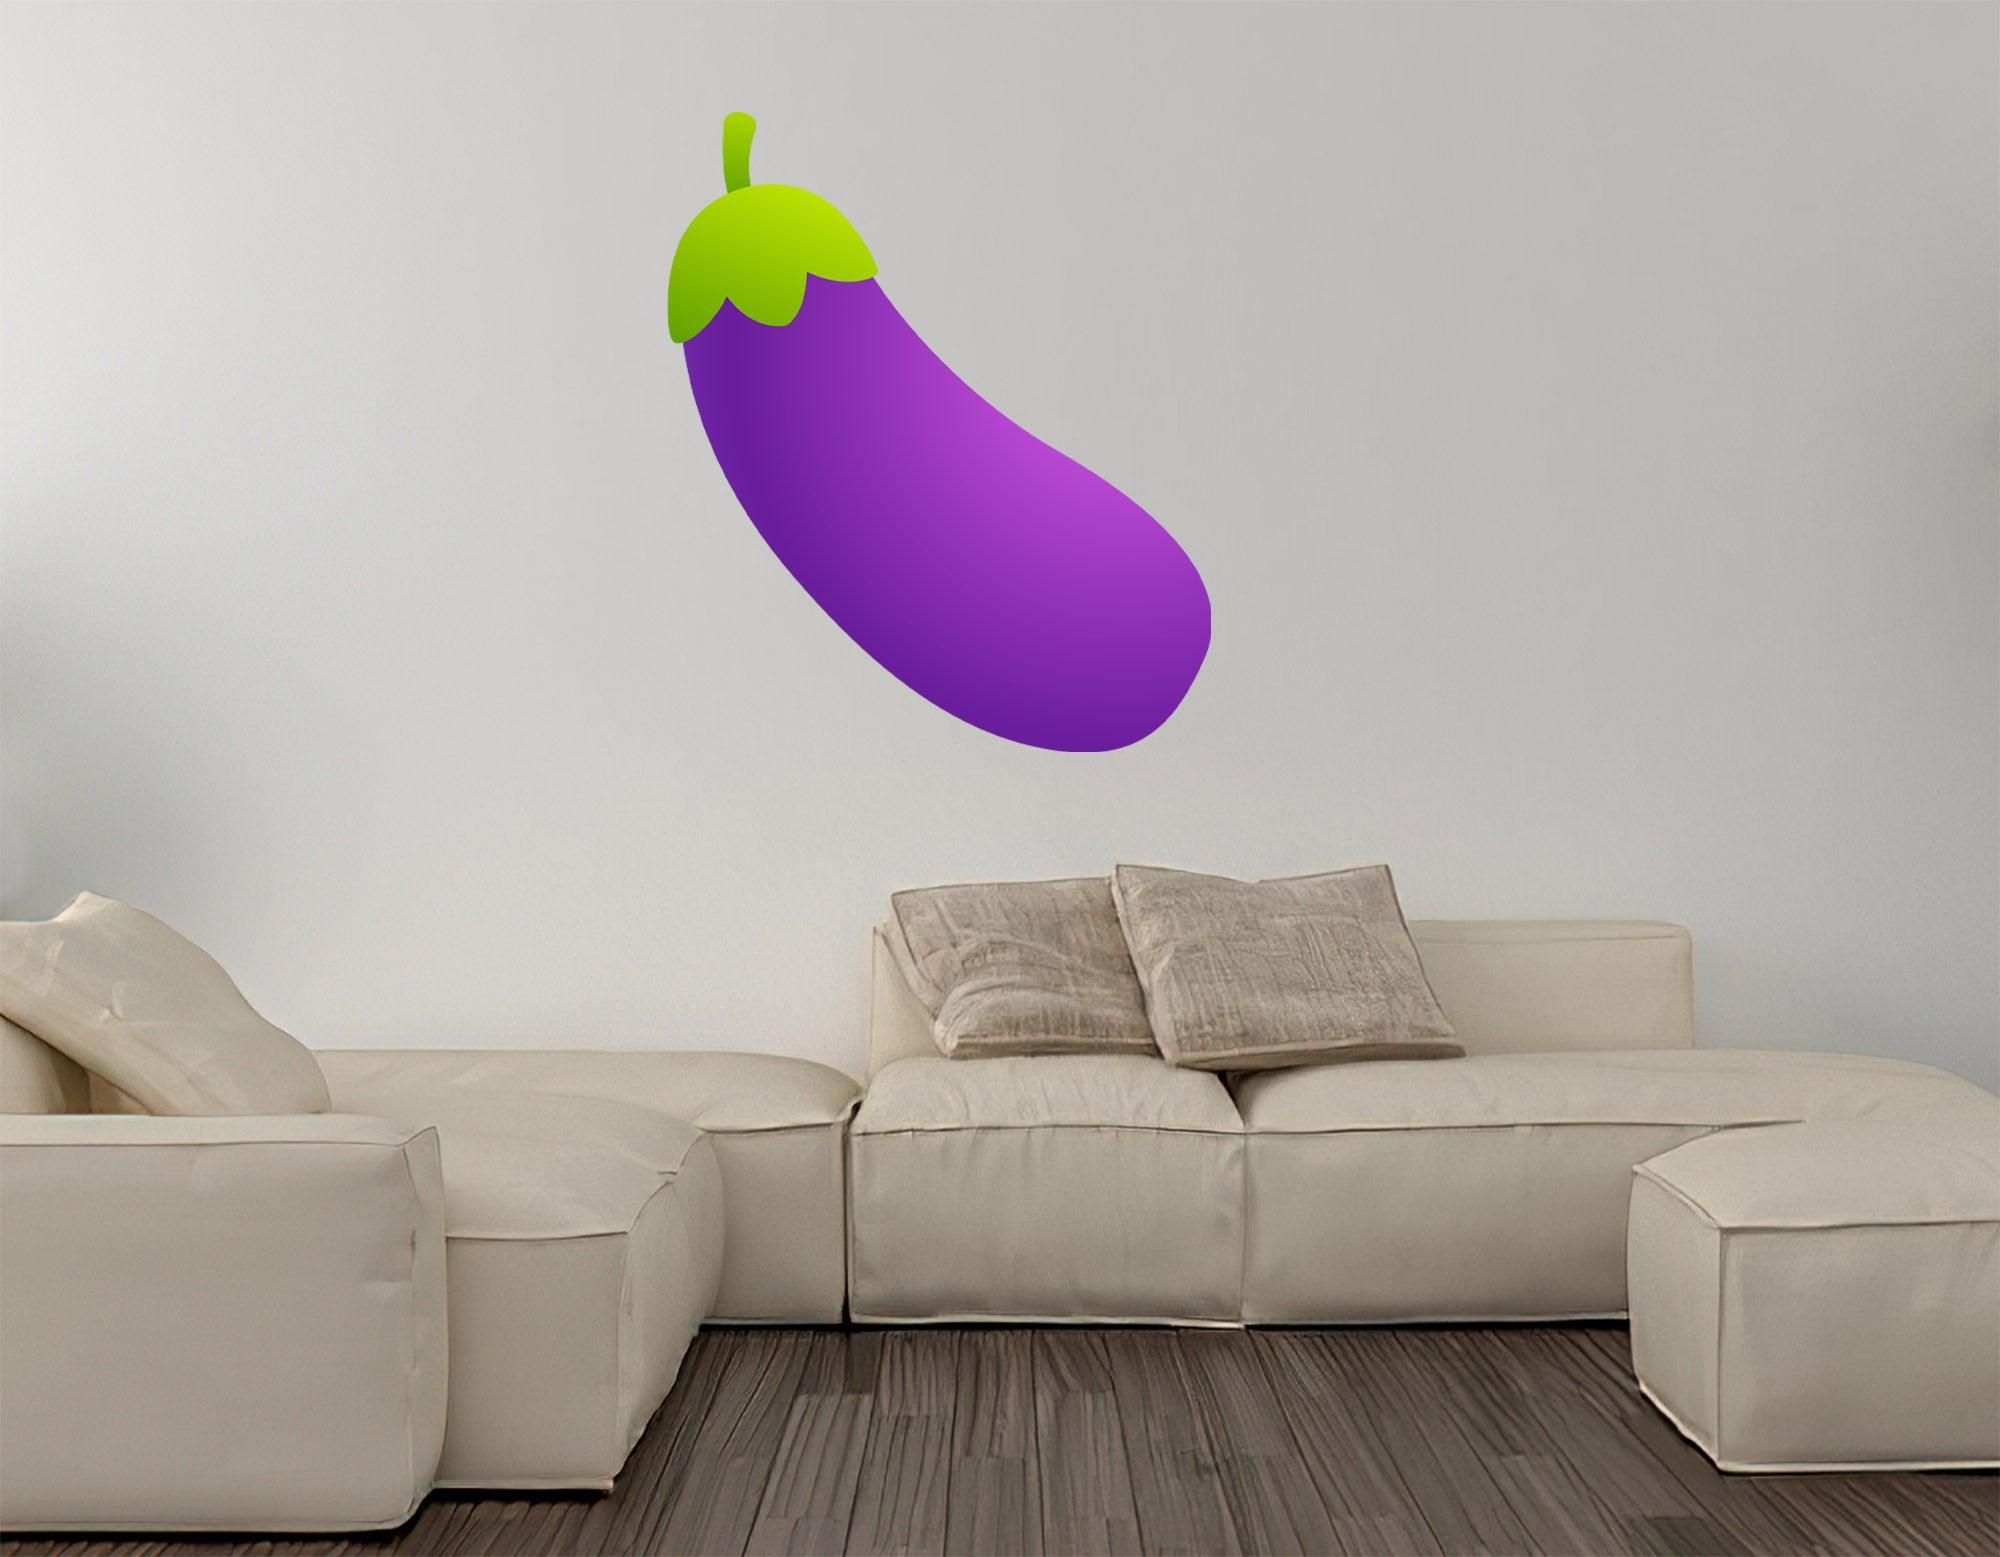 Egg plant Emoji Decal, Removable Sticker Wall Decal